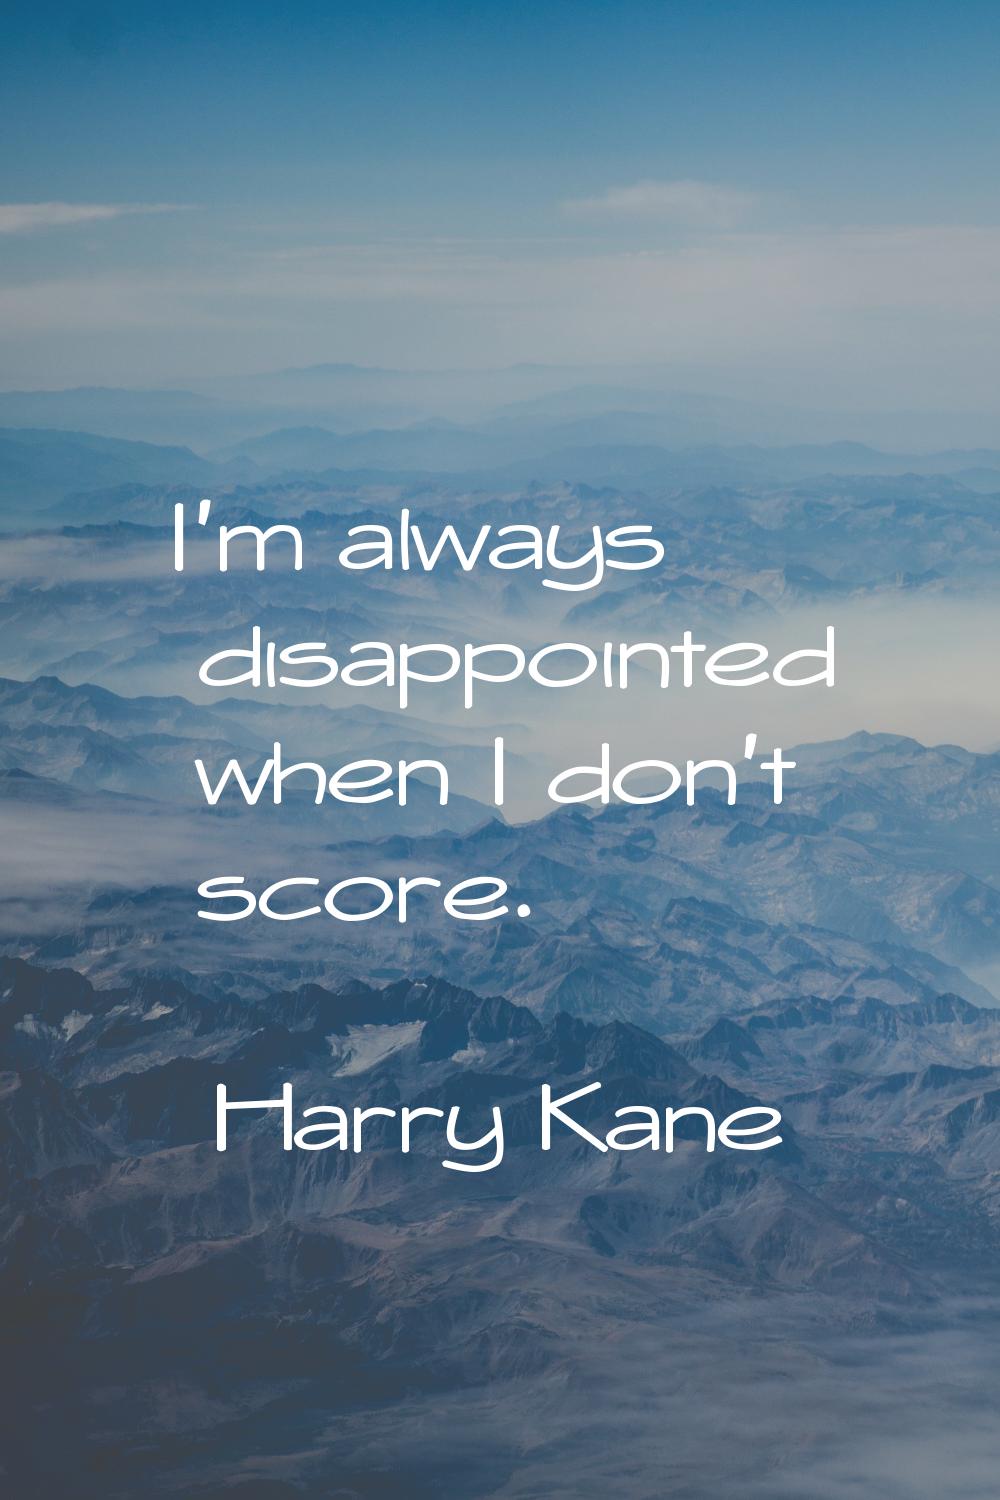 I'm always disappointed when I don't score.